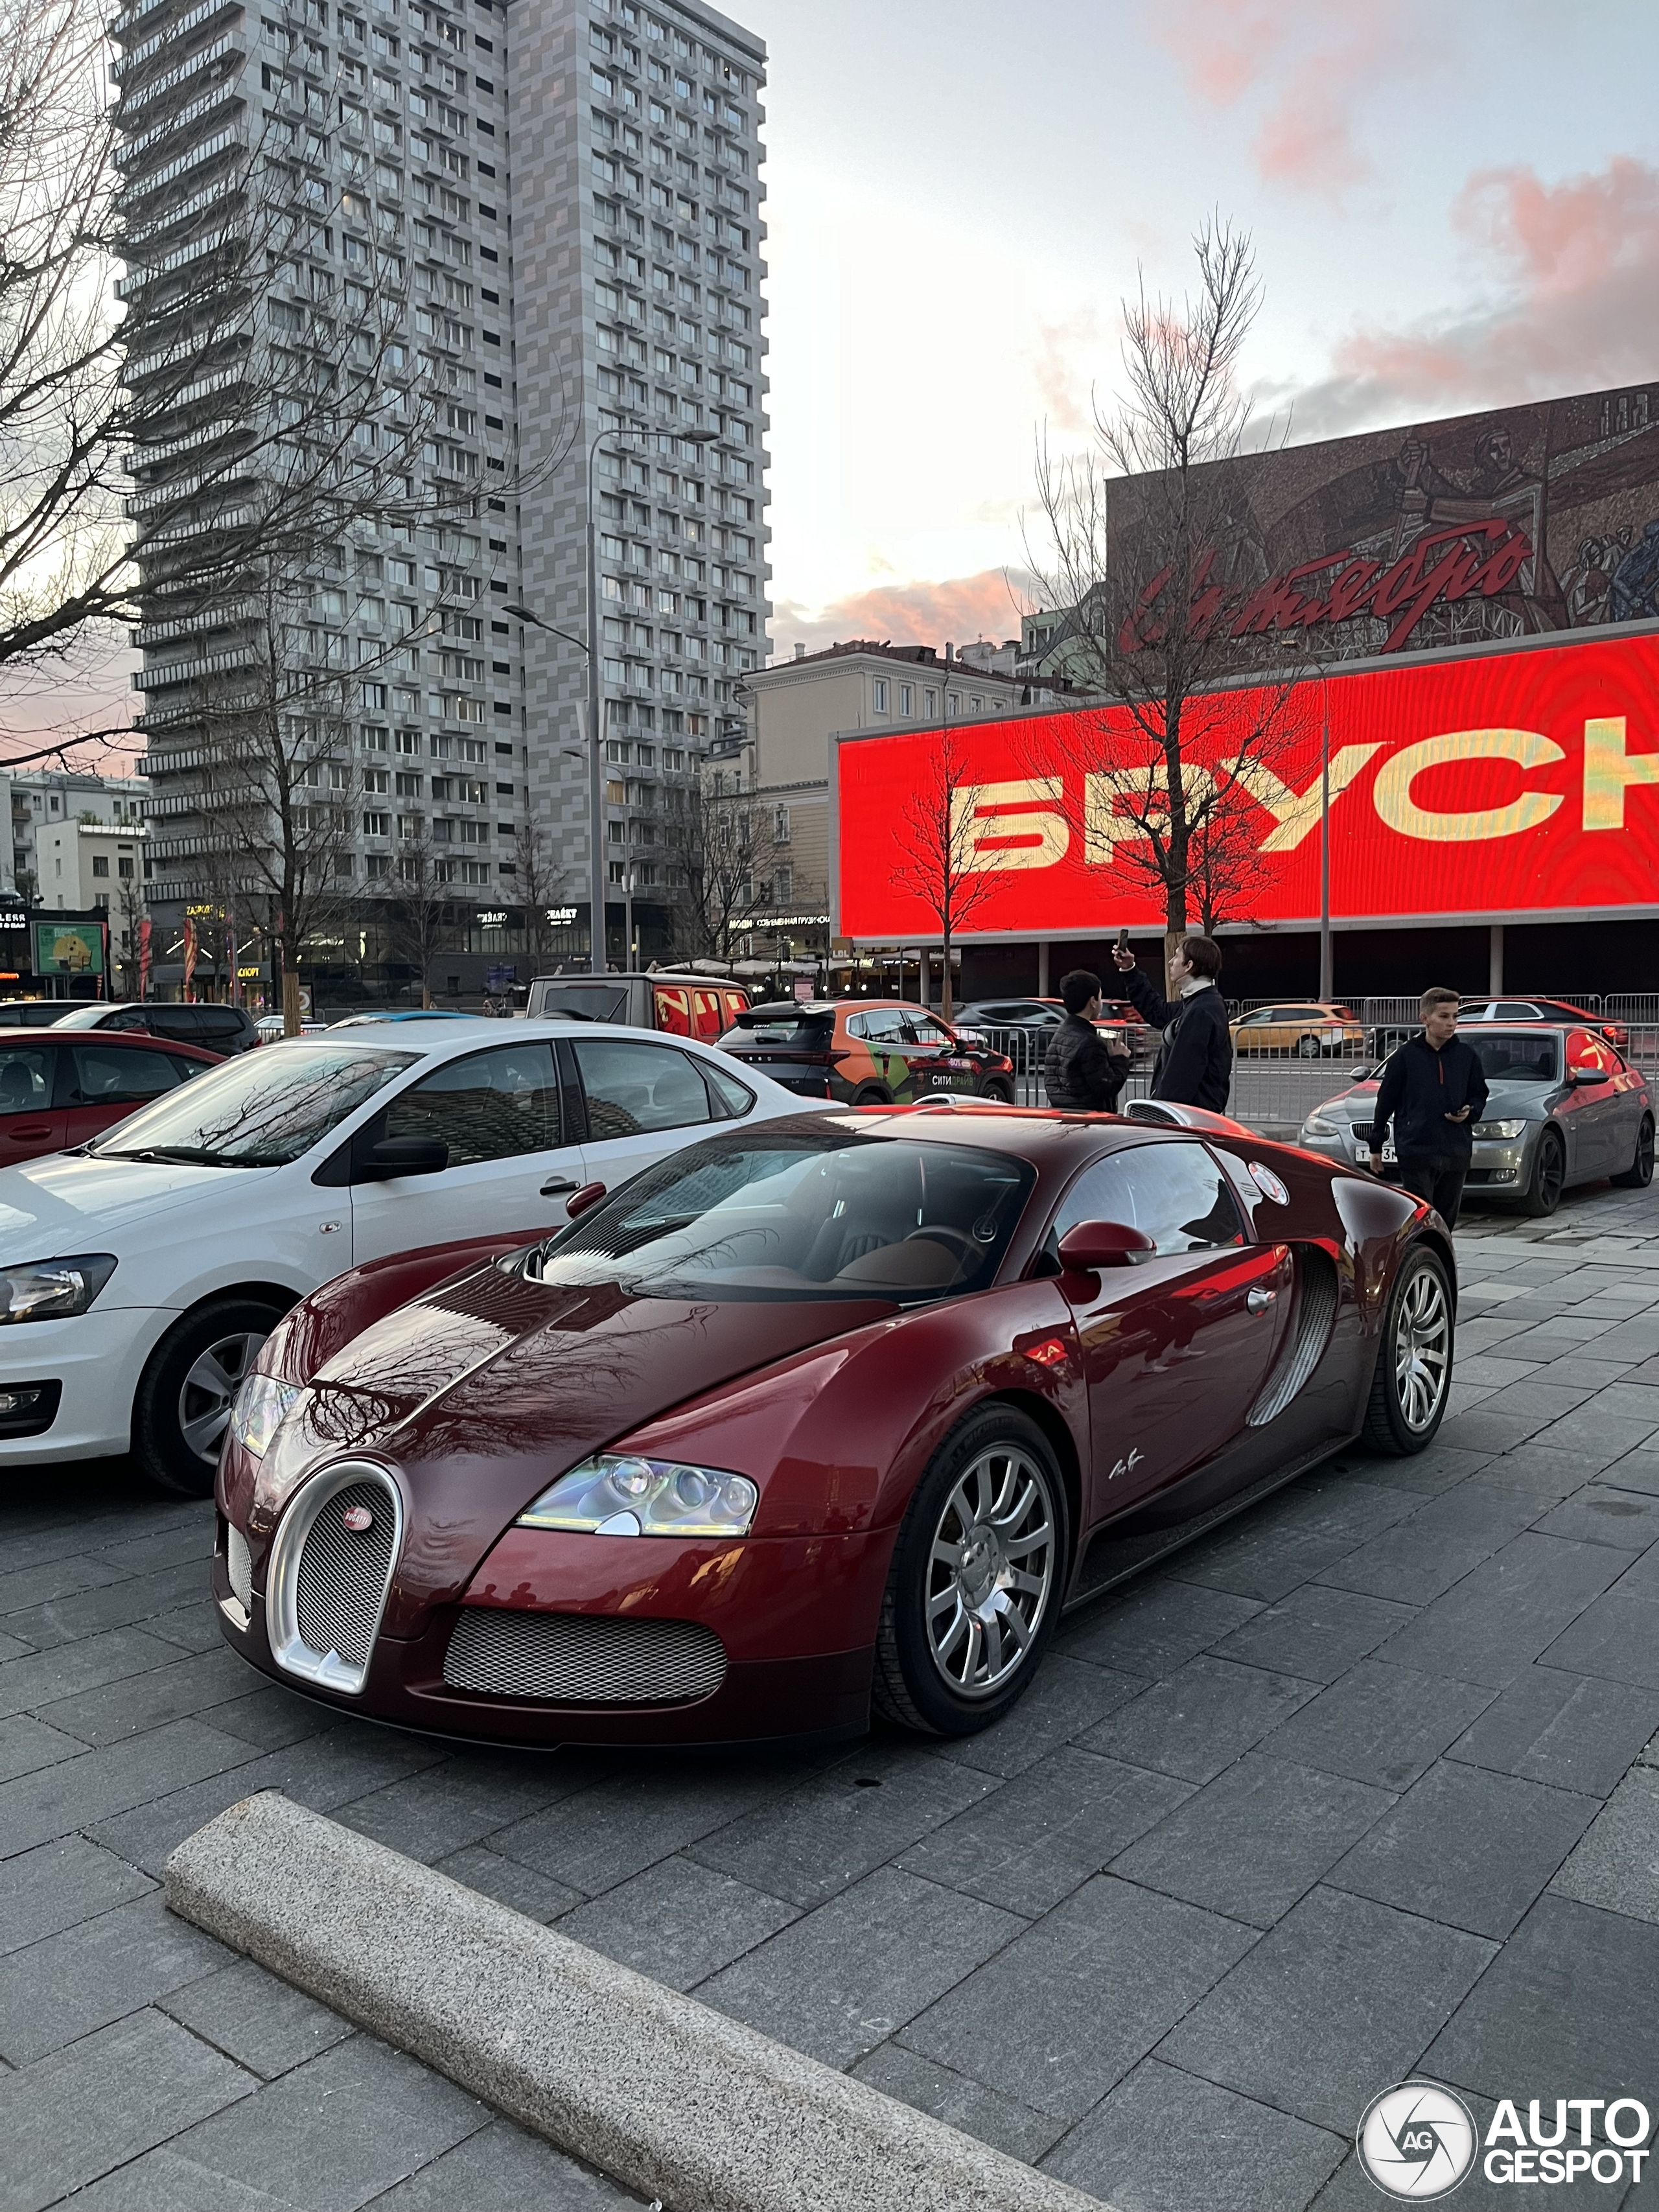 What is the likelihood of seeing a Bugatti in Russia?